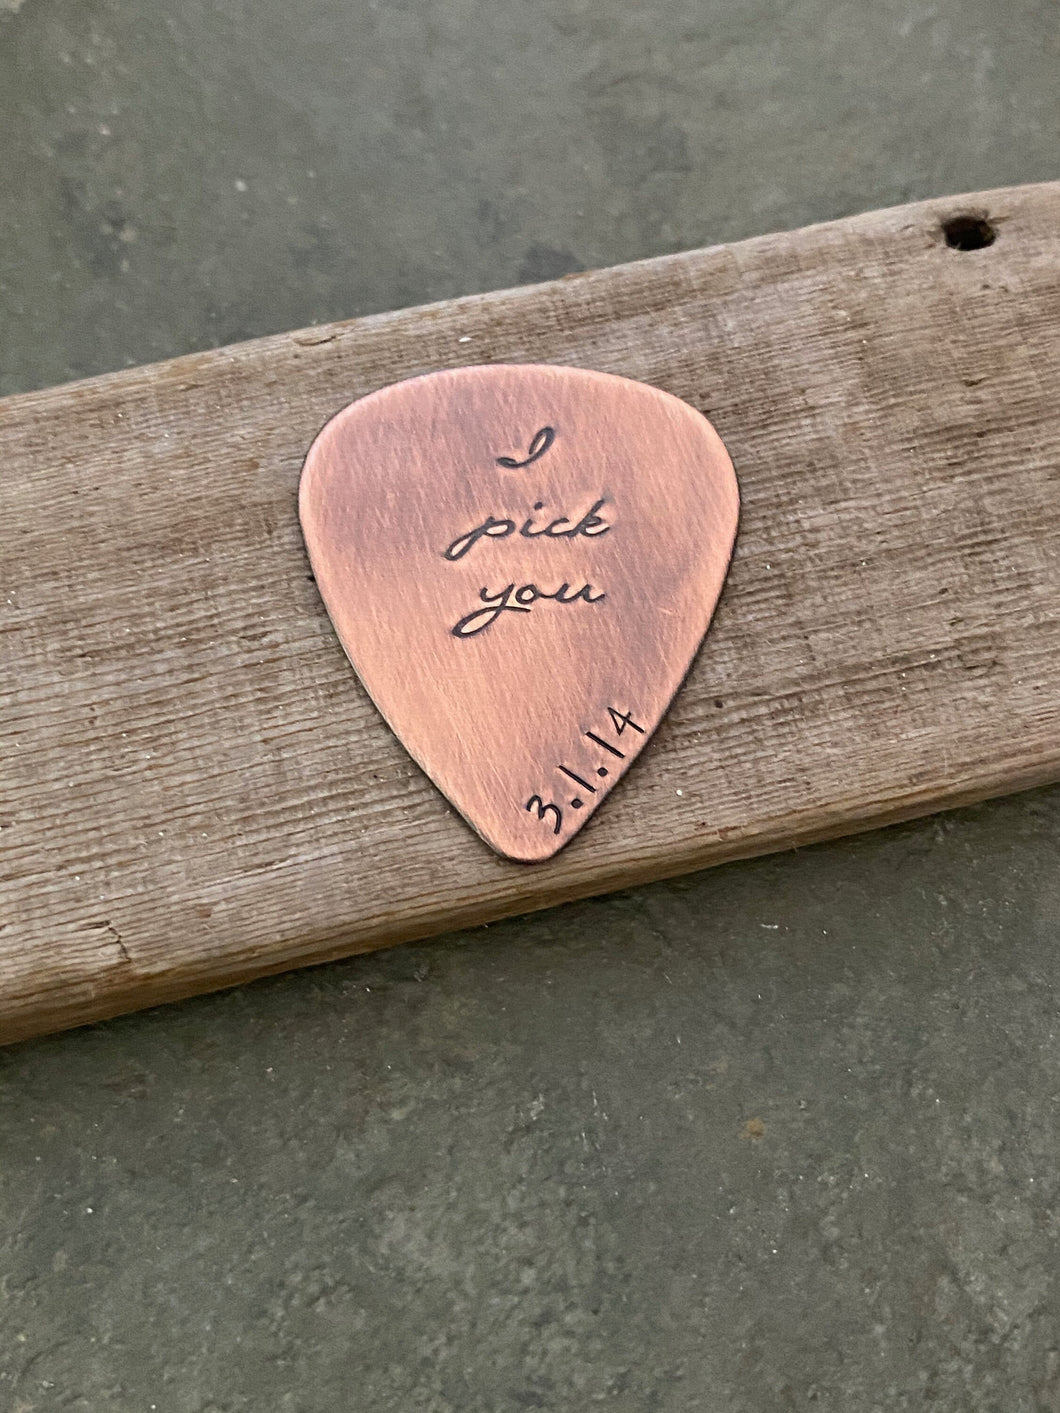 I pick you, with Date Hand Stamped Rustic Copper Guitar Pick, Playable, Inspirational, 24 gauge, Gift for Boyfriend, Dad, Husband Wedding